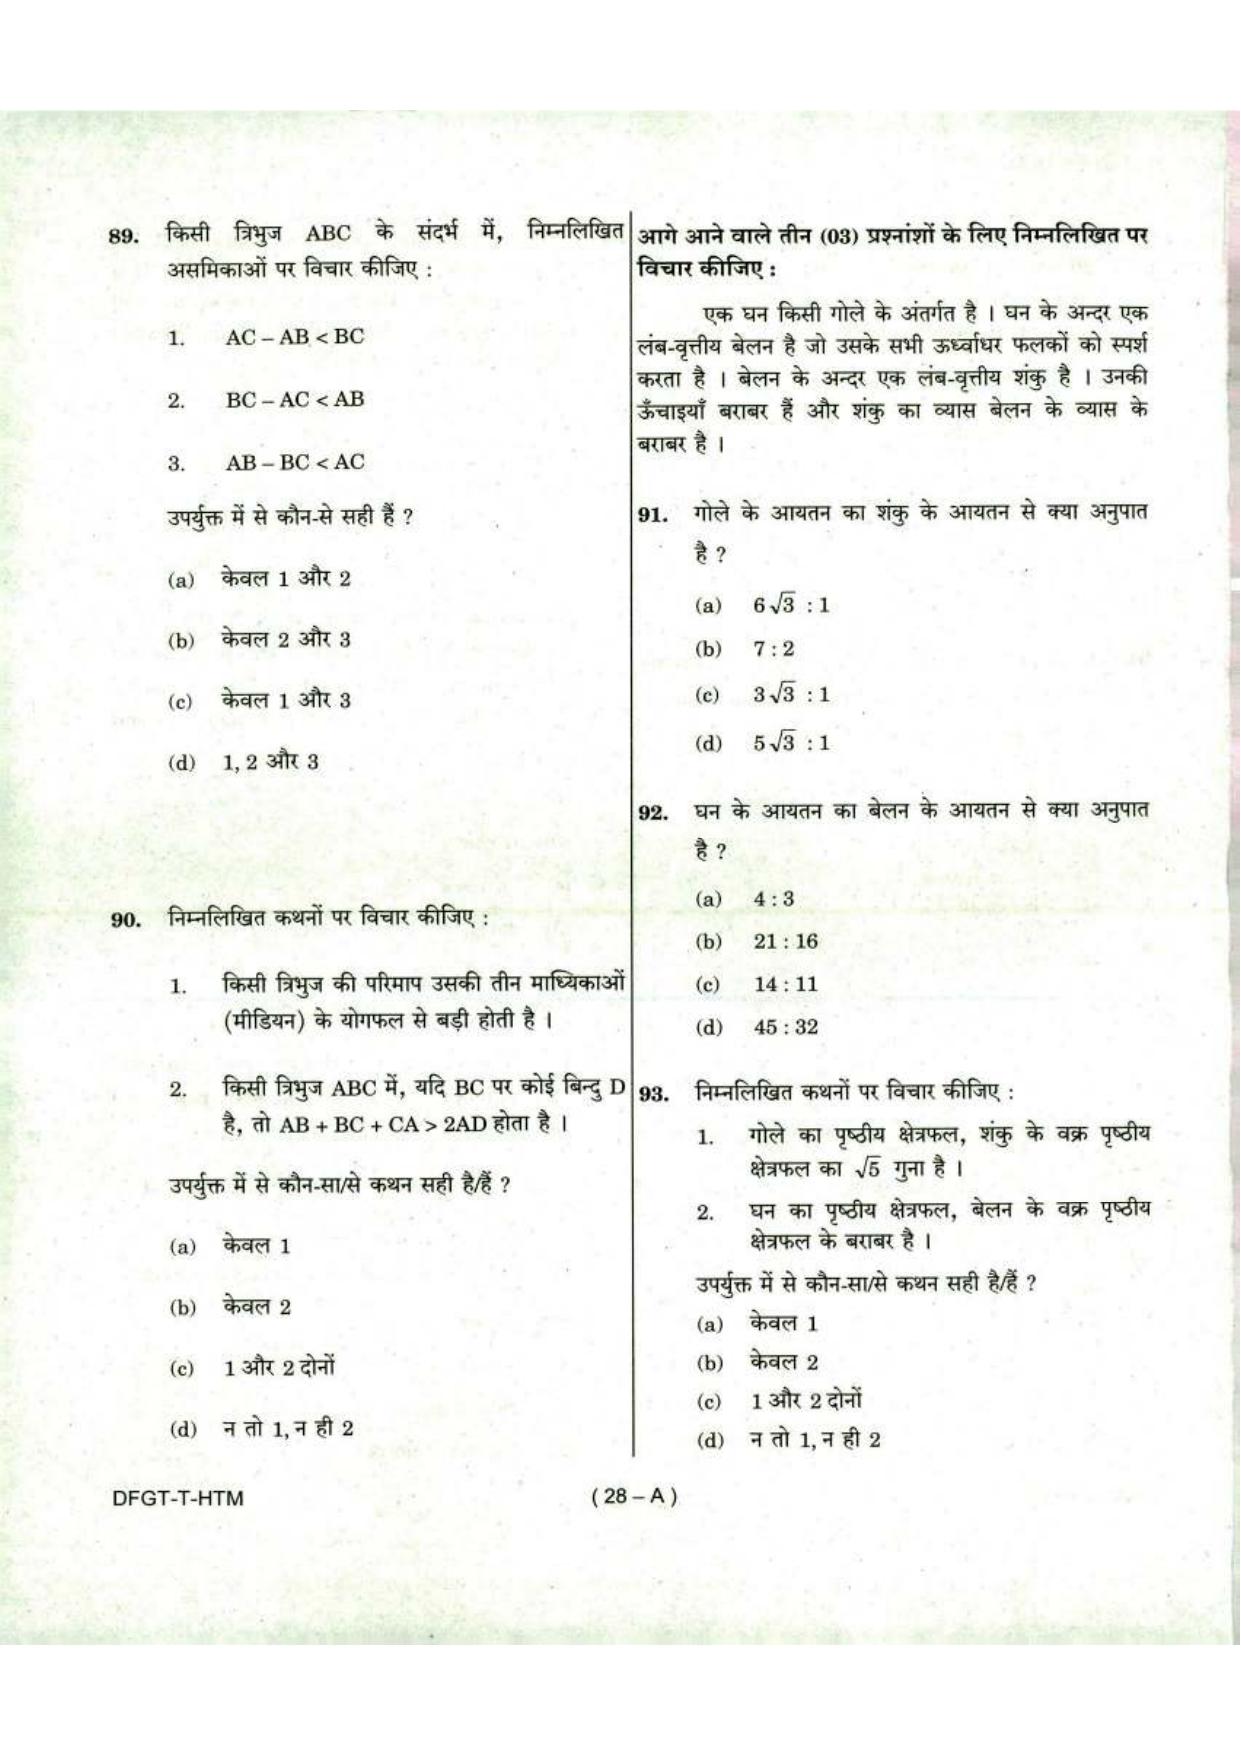 To Download Arunachal Pradesh Police Constable Elementary Mathematics Model Papers - Page 28